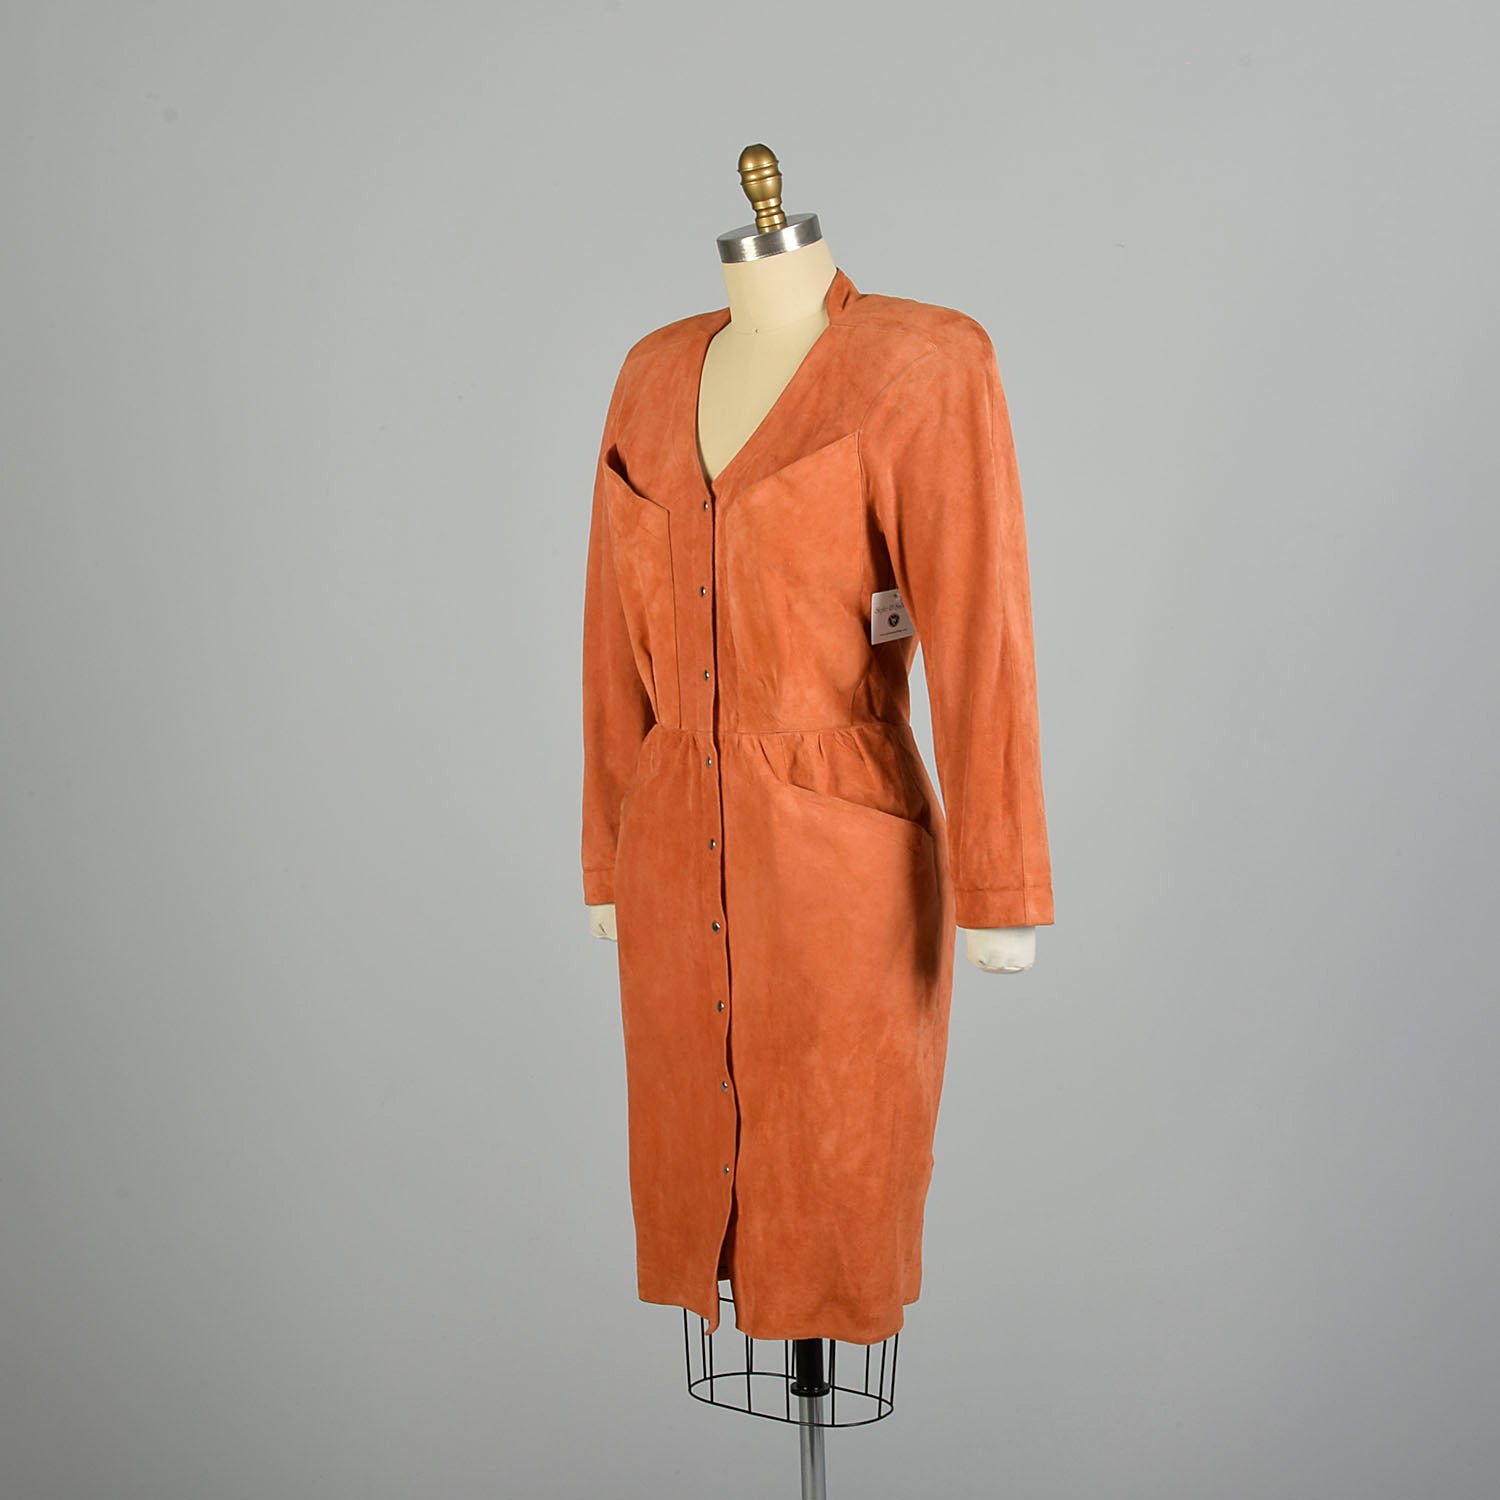 LG 1980s Thierry Mugler Leather Hourglass Suede Dress Orange Snap Front Knee Length Sexy Fitted Dress